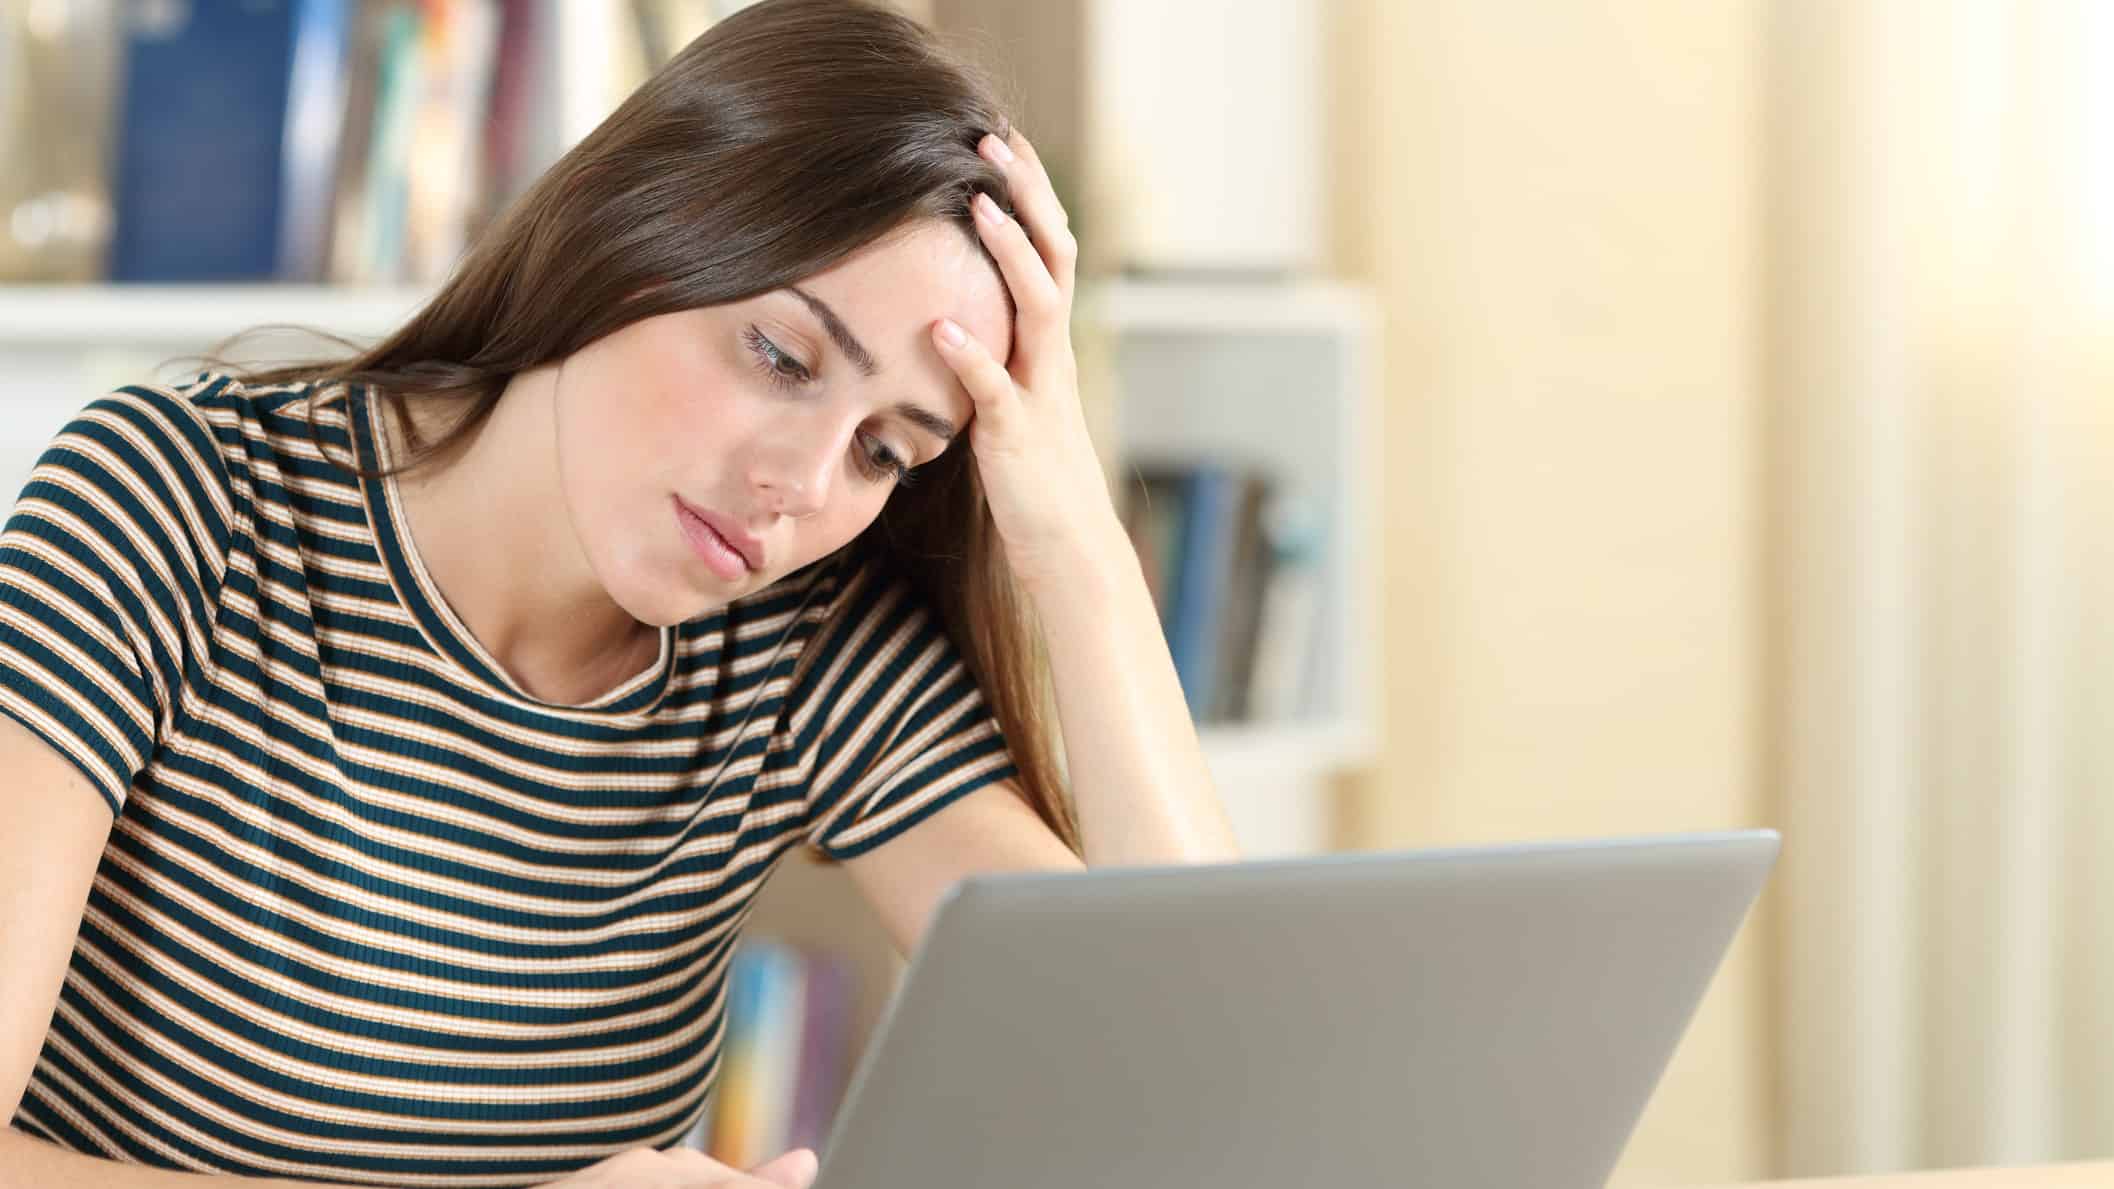 a woman looks exhausted and overwhelmed as she slumps forward into her hand while looking at her laptop screen.